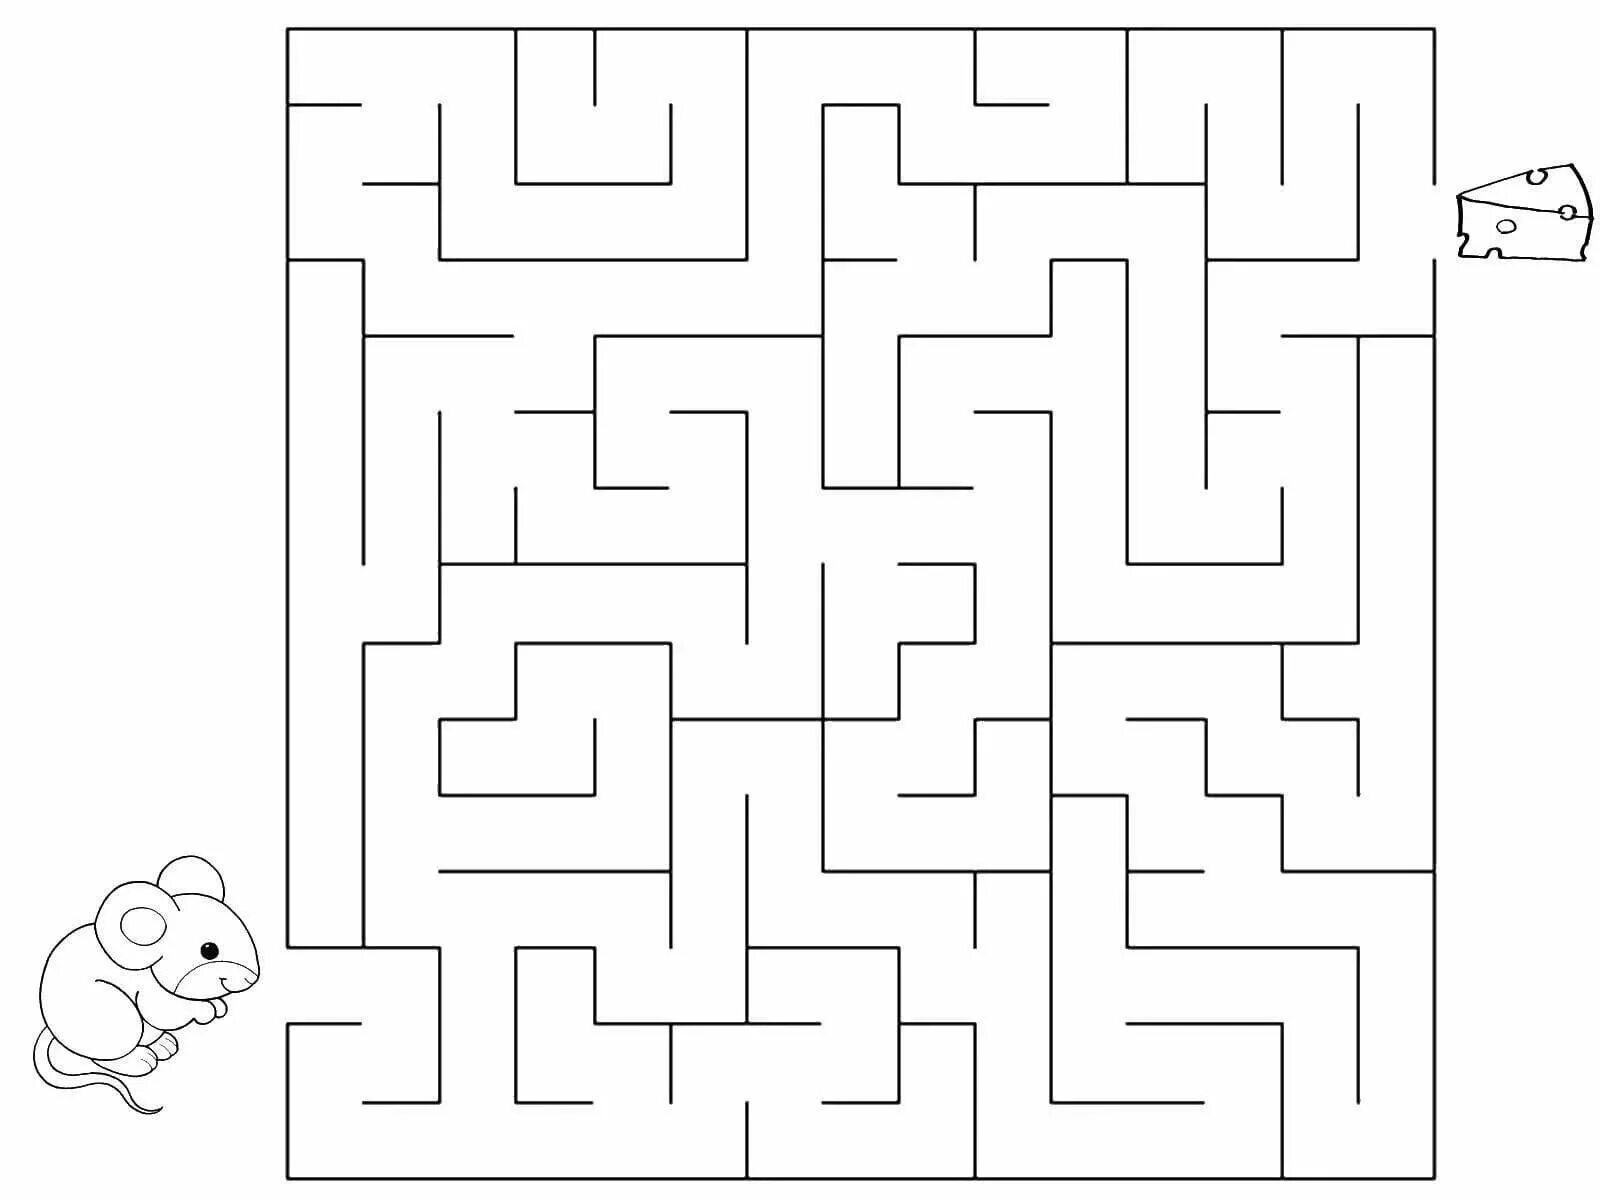 Labyrinth for 7 year olds #3